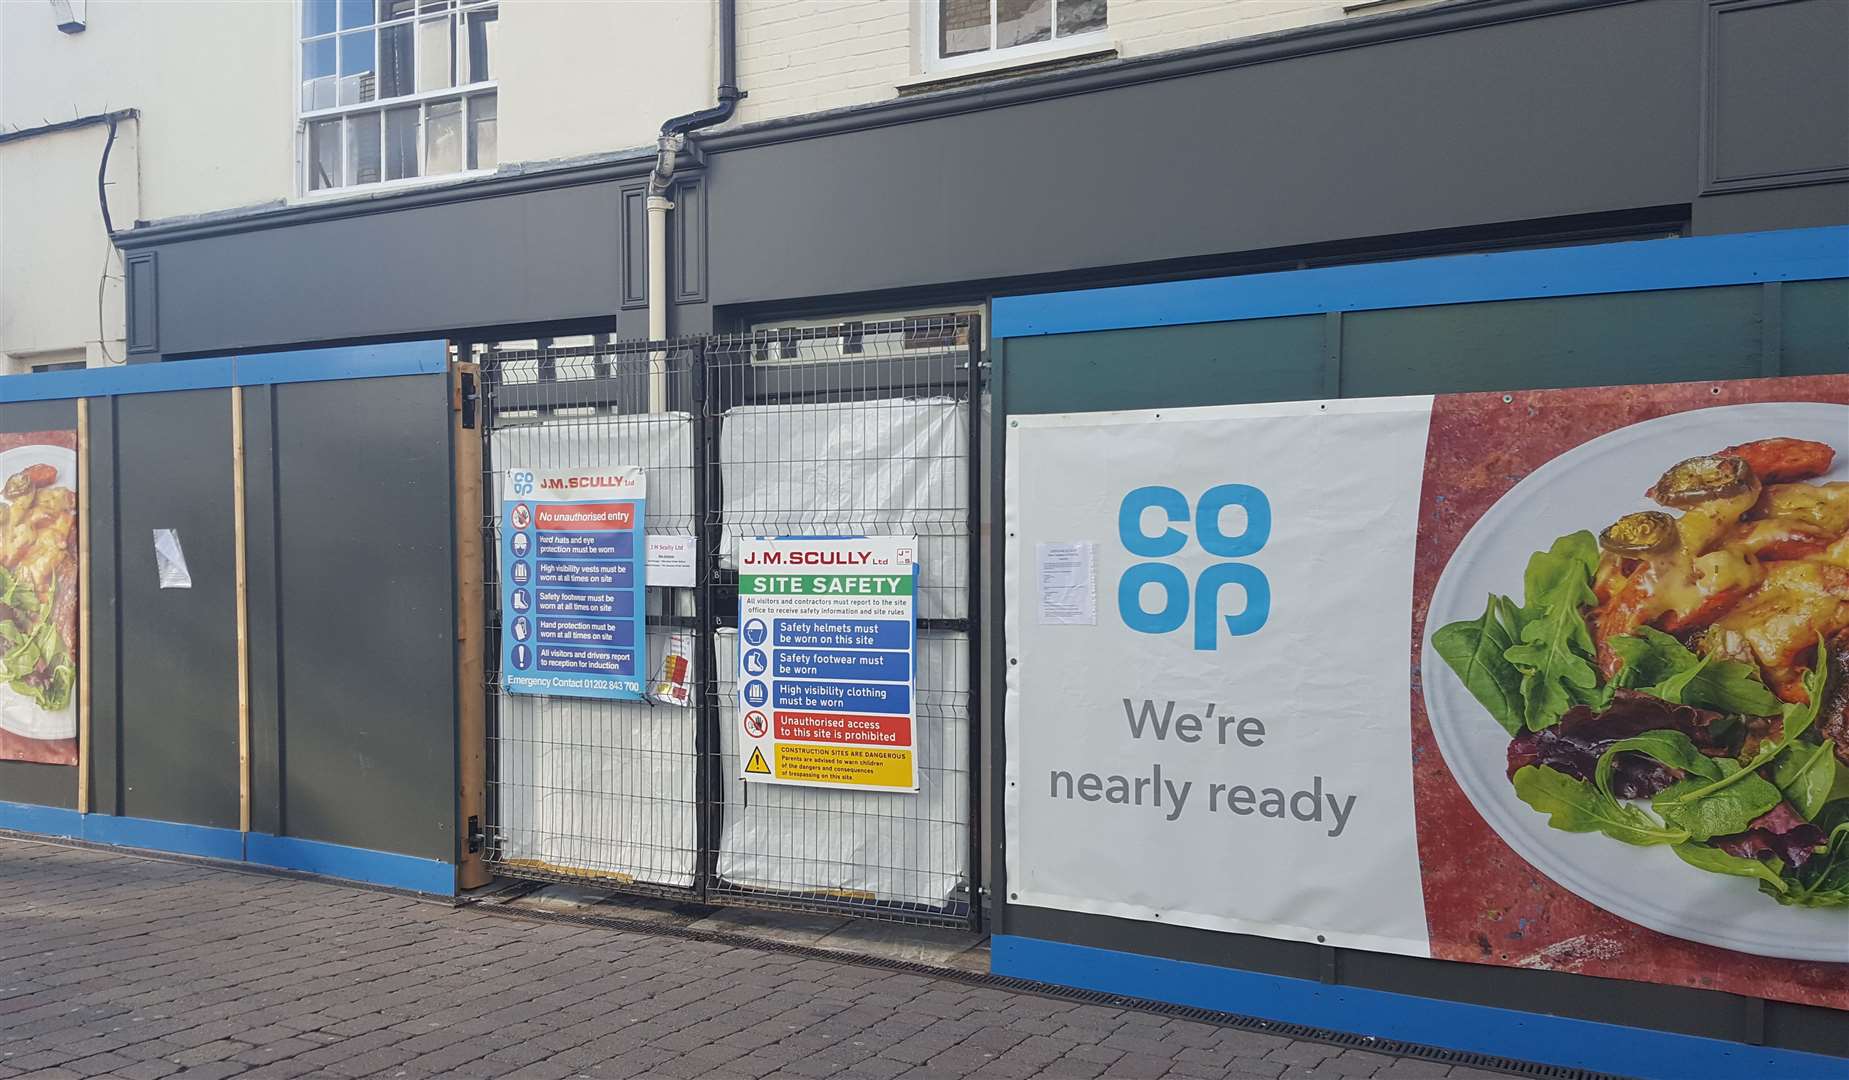 The Co-Op building shortly before it opened in 2018